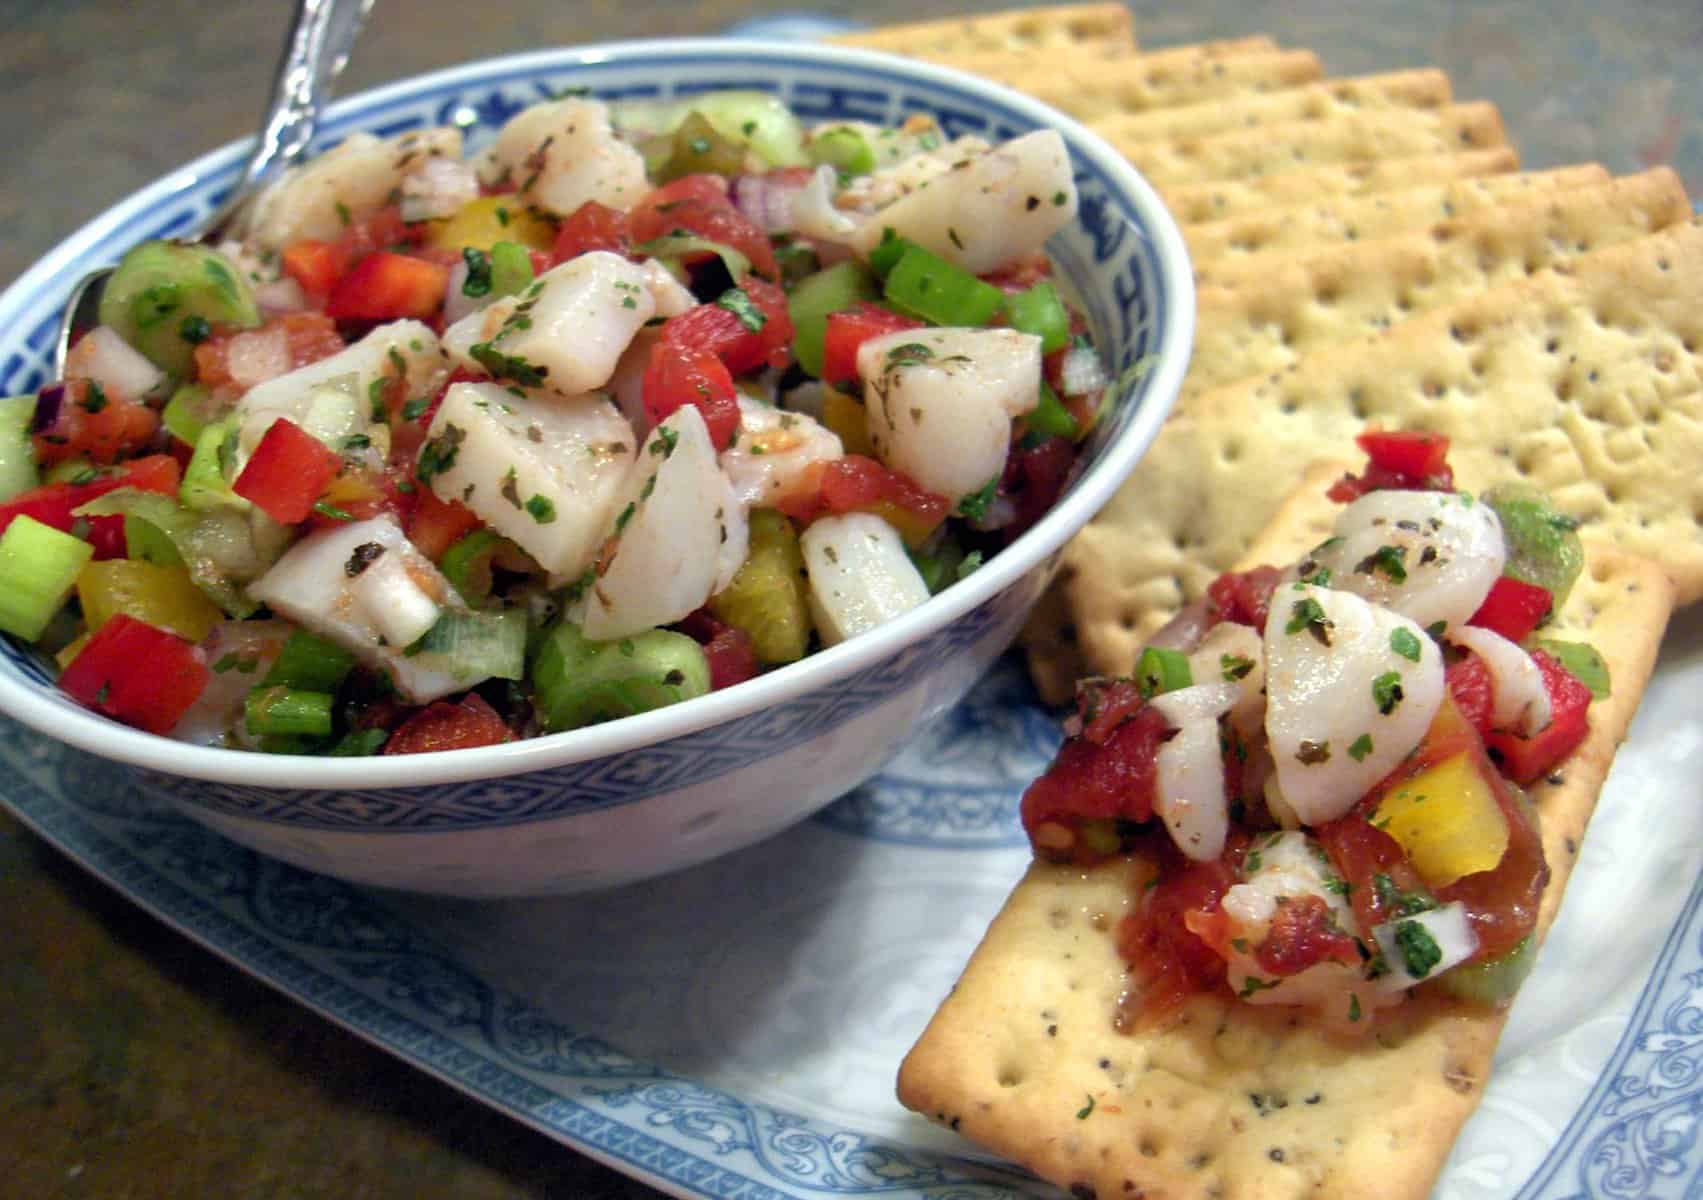  Tired of the same old shrimp cocktail? Upgrade to this mouth-watering scallop ceviche!